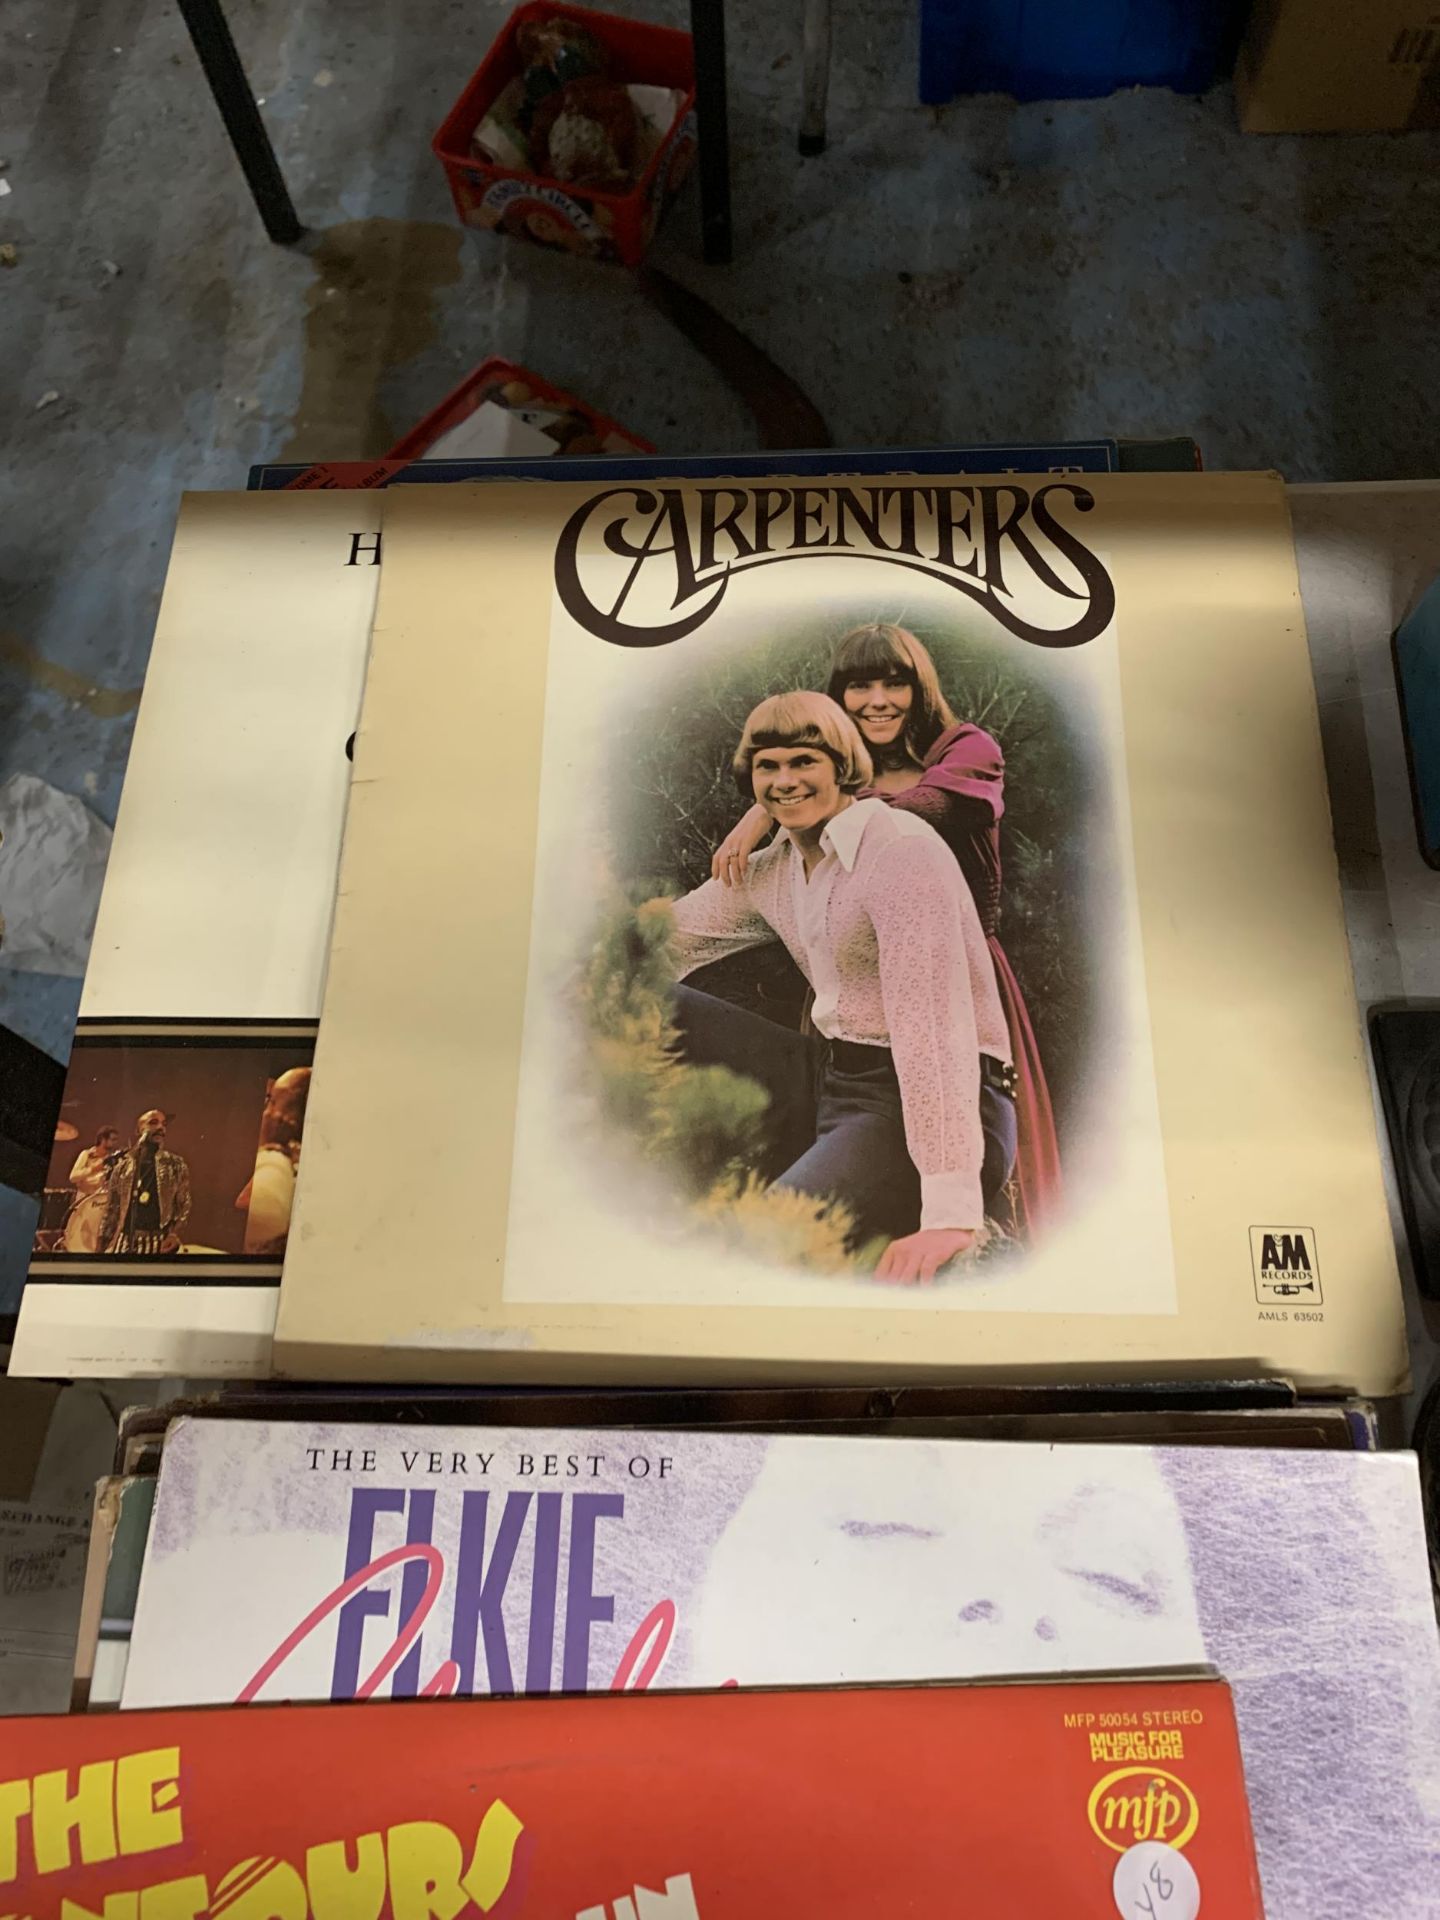 A QUANTITY OF VINTAGE 33RPM LP VINYL RECORDS TO INCLUDE THE CARPENTERS, HOT CHOCOLATE, SIMON AND - Image 2 of 3